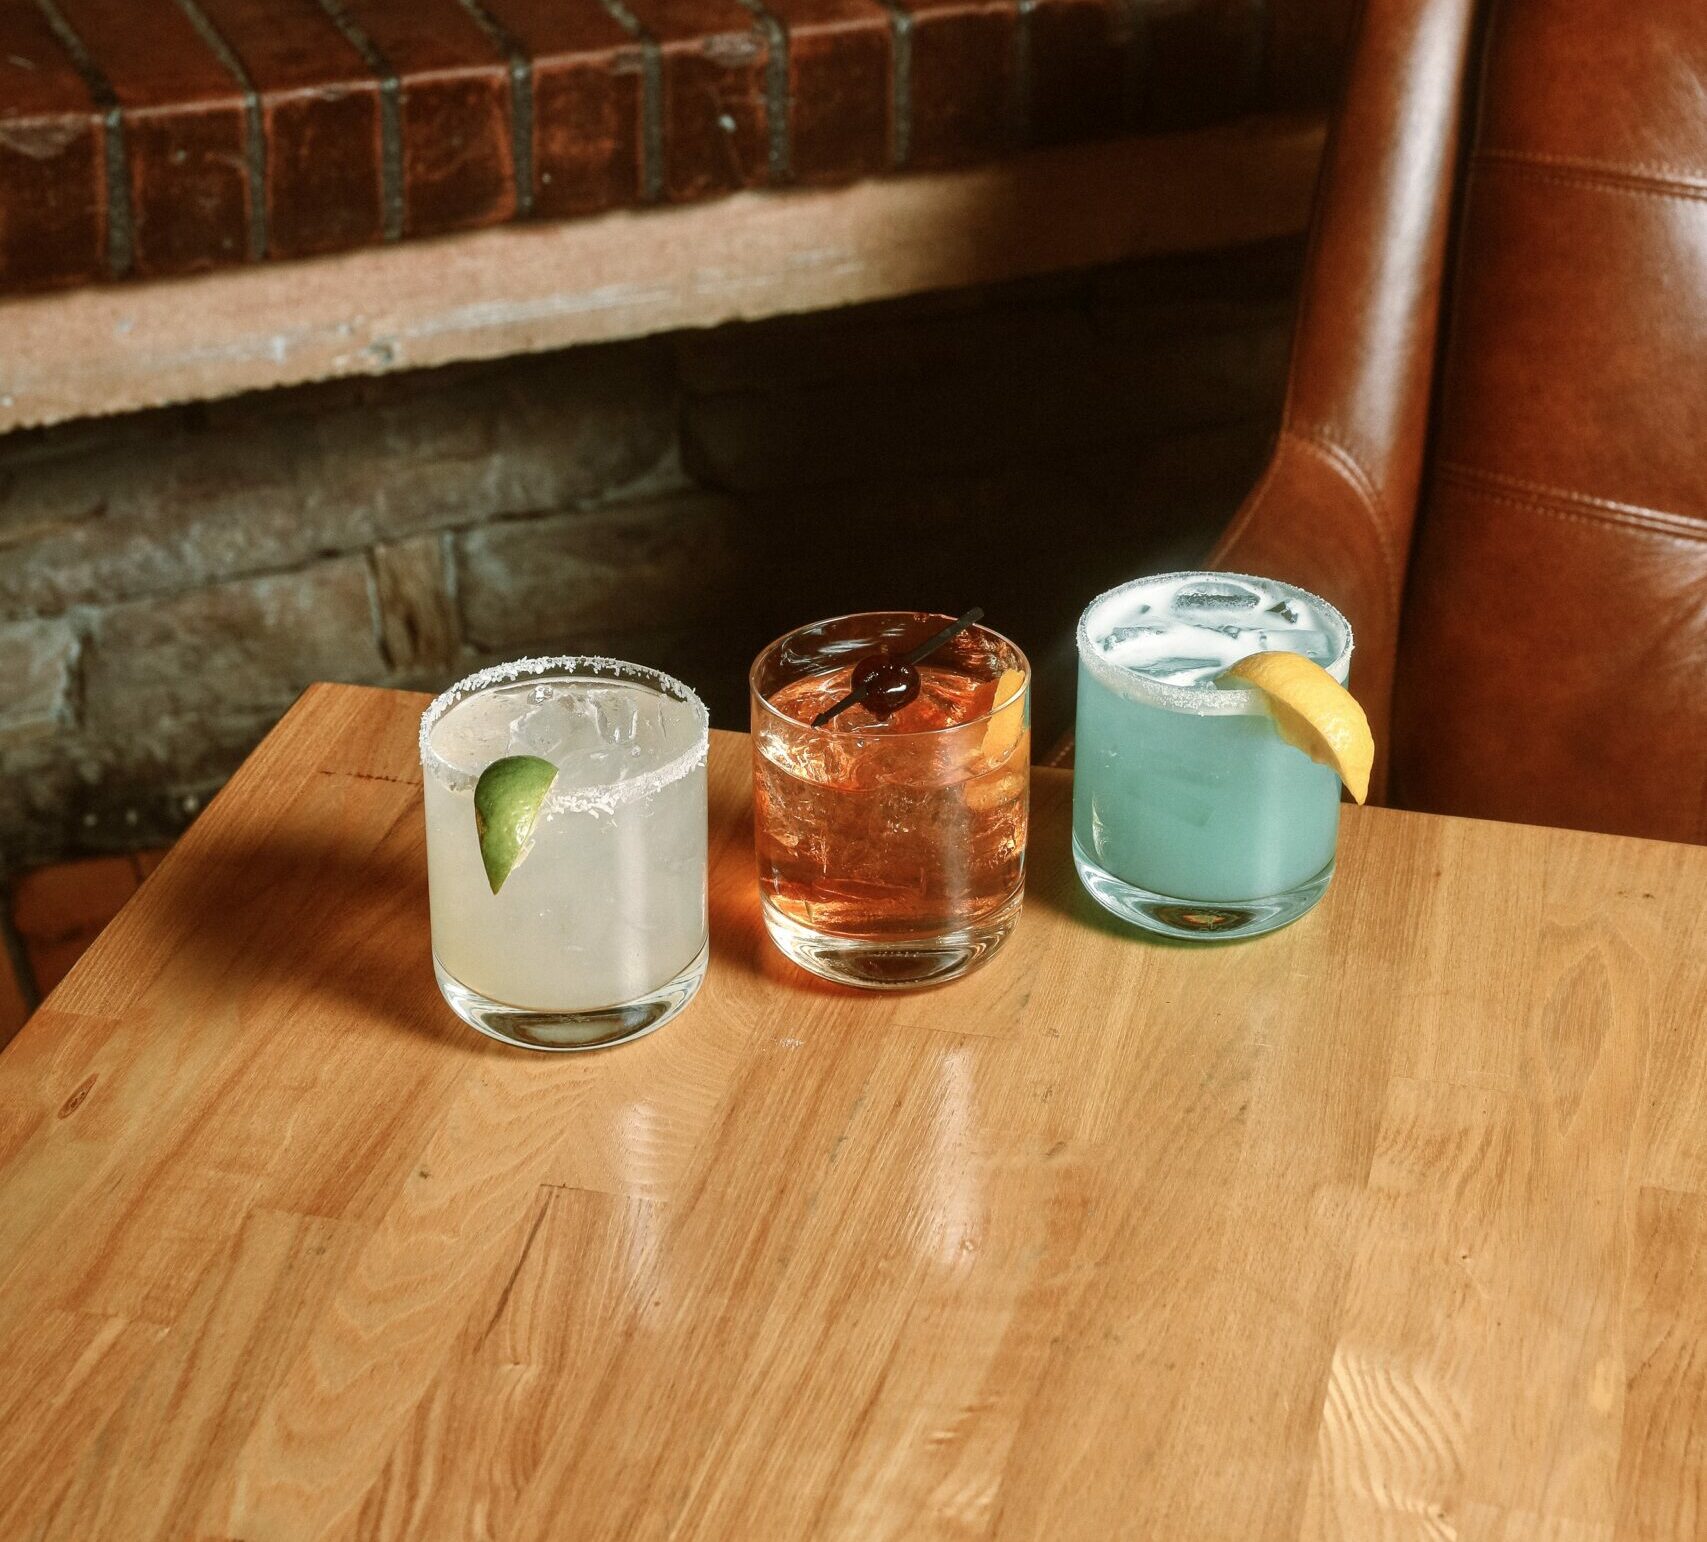 Three distinct cocktail glasses elegantly arranged on the edge of the wooden finish table.